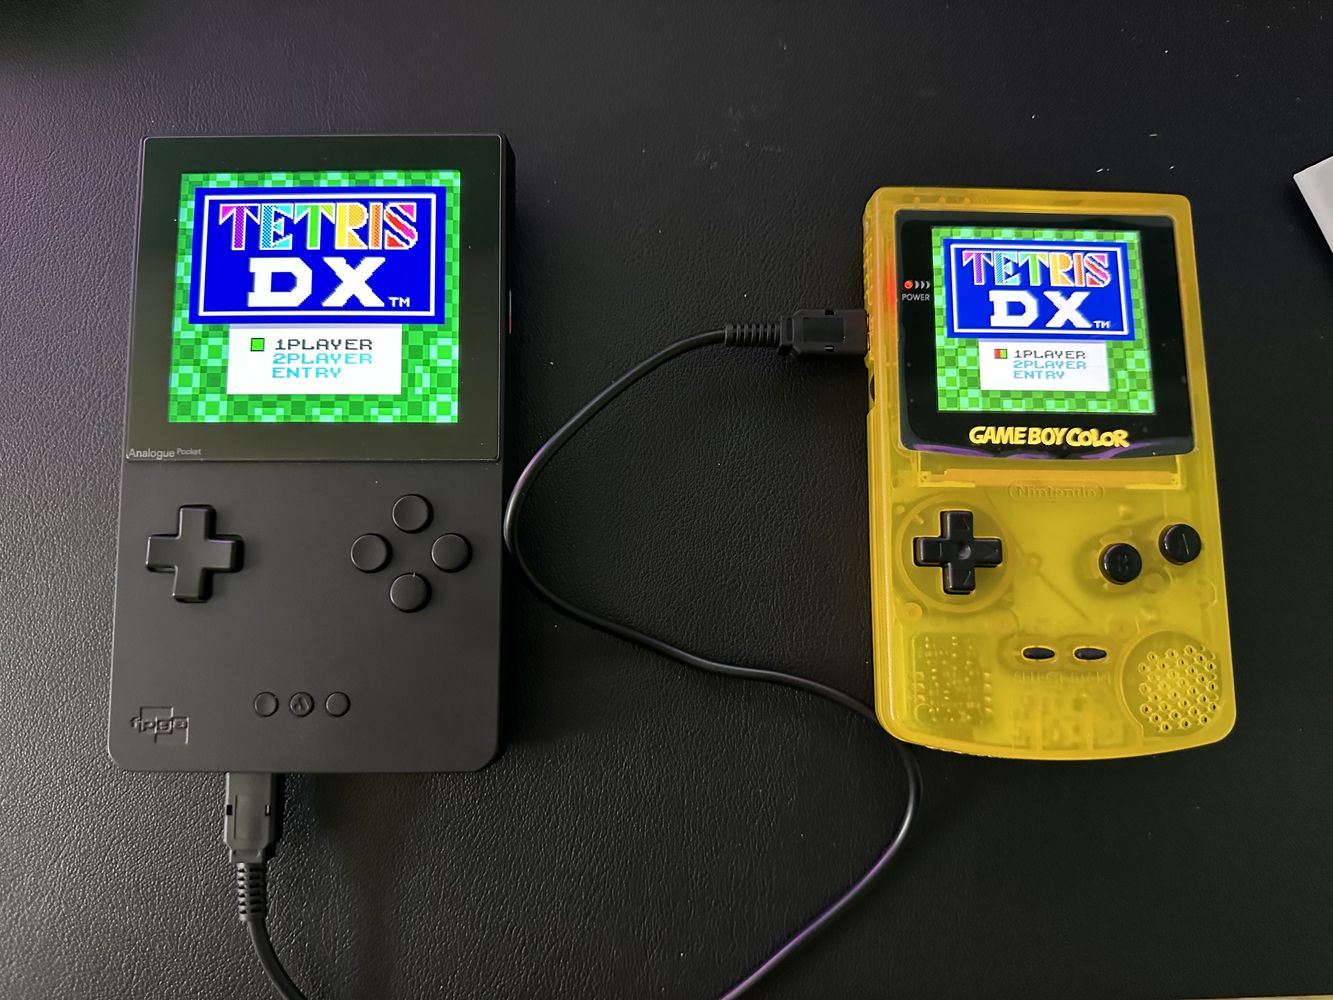 Black Analogue Pocket next to a yellow Game Boy Color. Both show Tetris DX title screen and are linked with a cable.